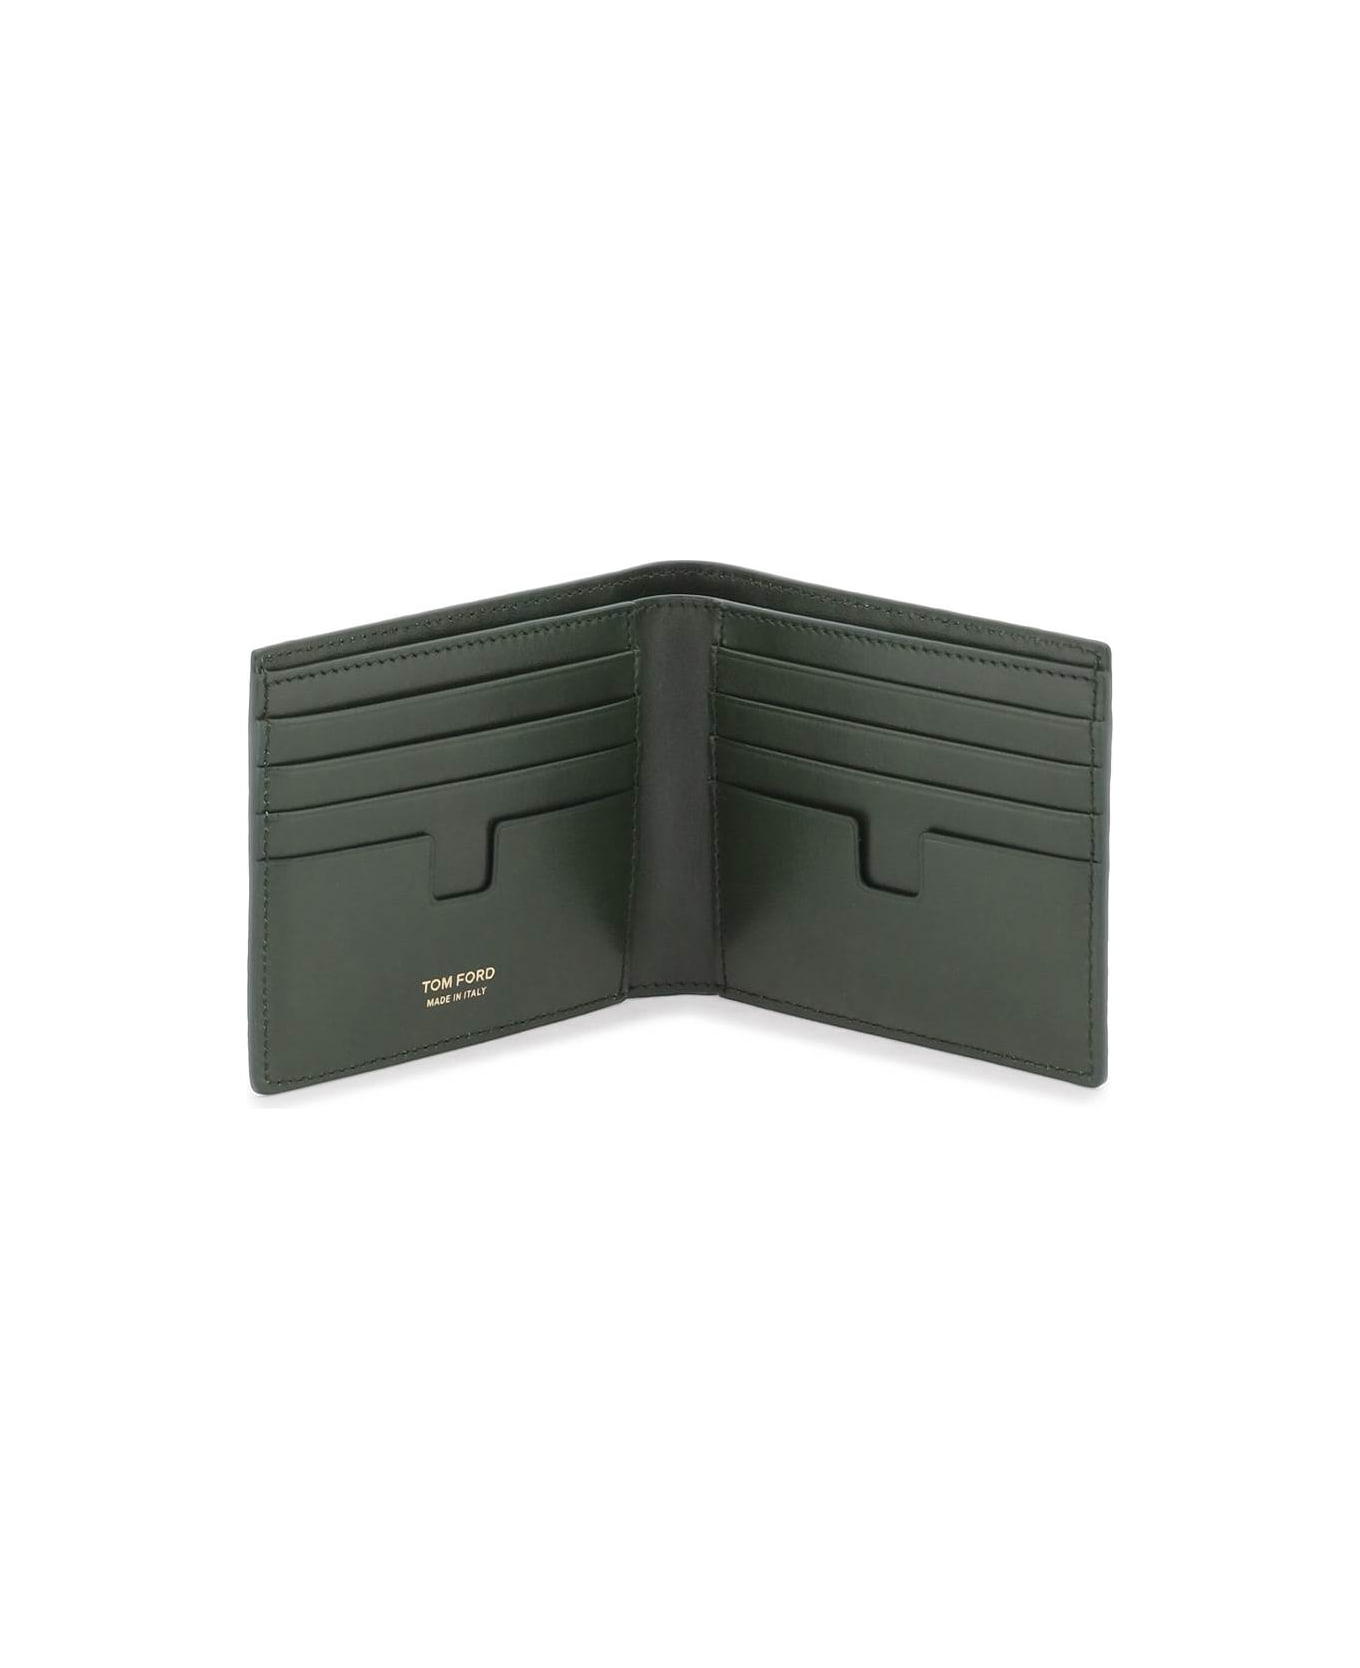 Tom Ford Croc T Line Wallet - RIFLE GREEN (Green)